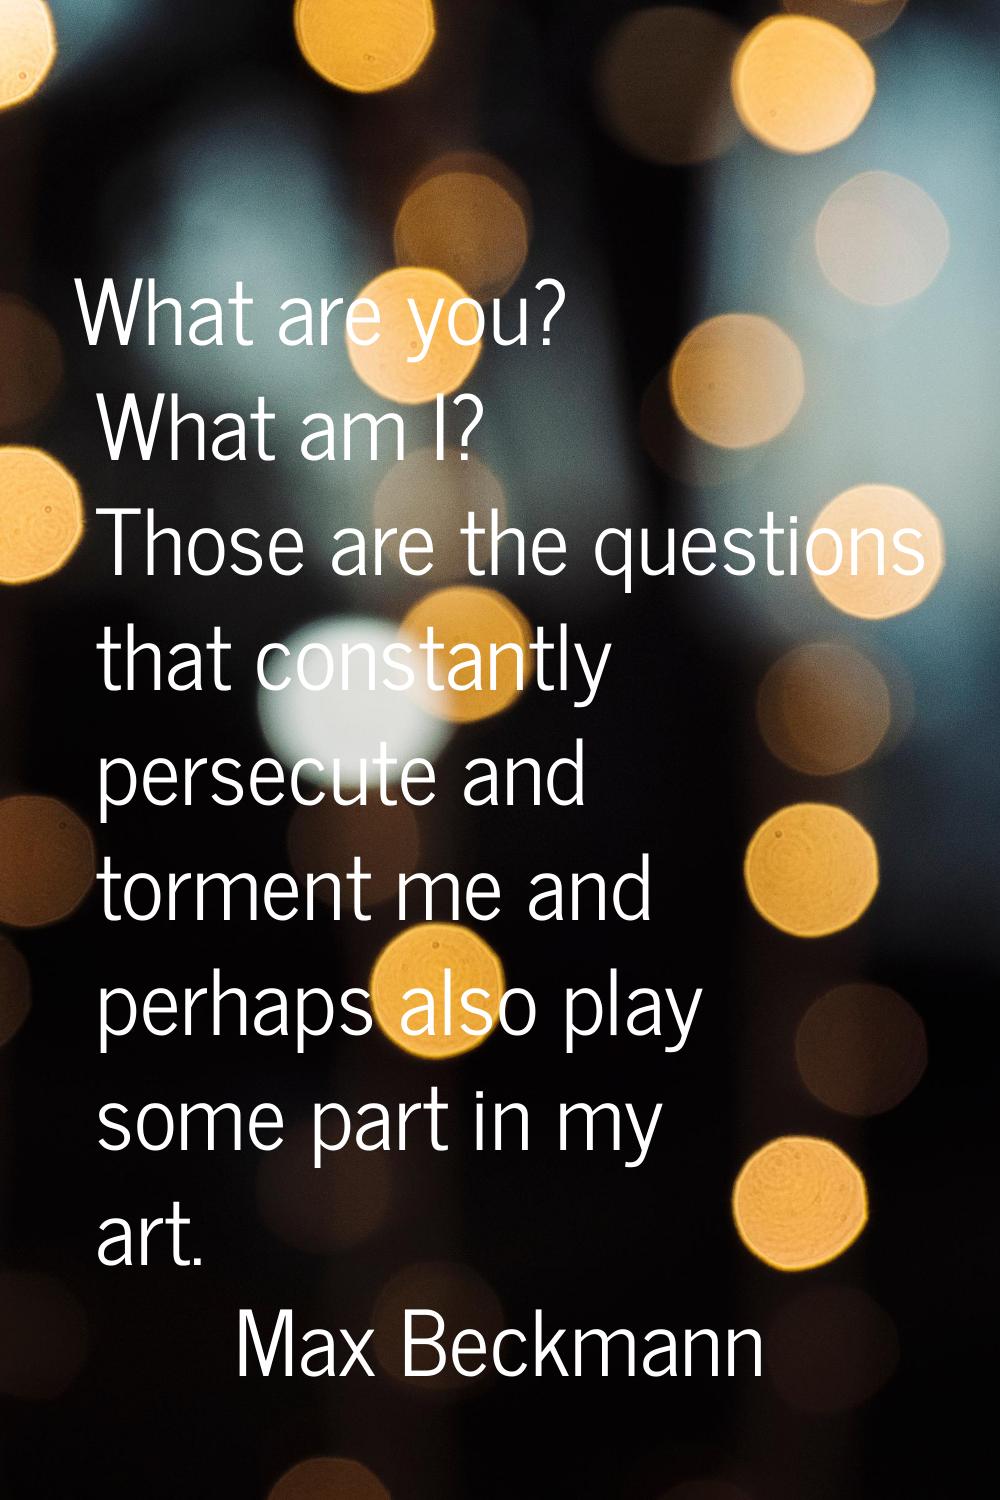 What are you? What am I? Those are the questions that constantly persecute and torment me and perha